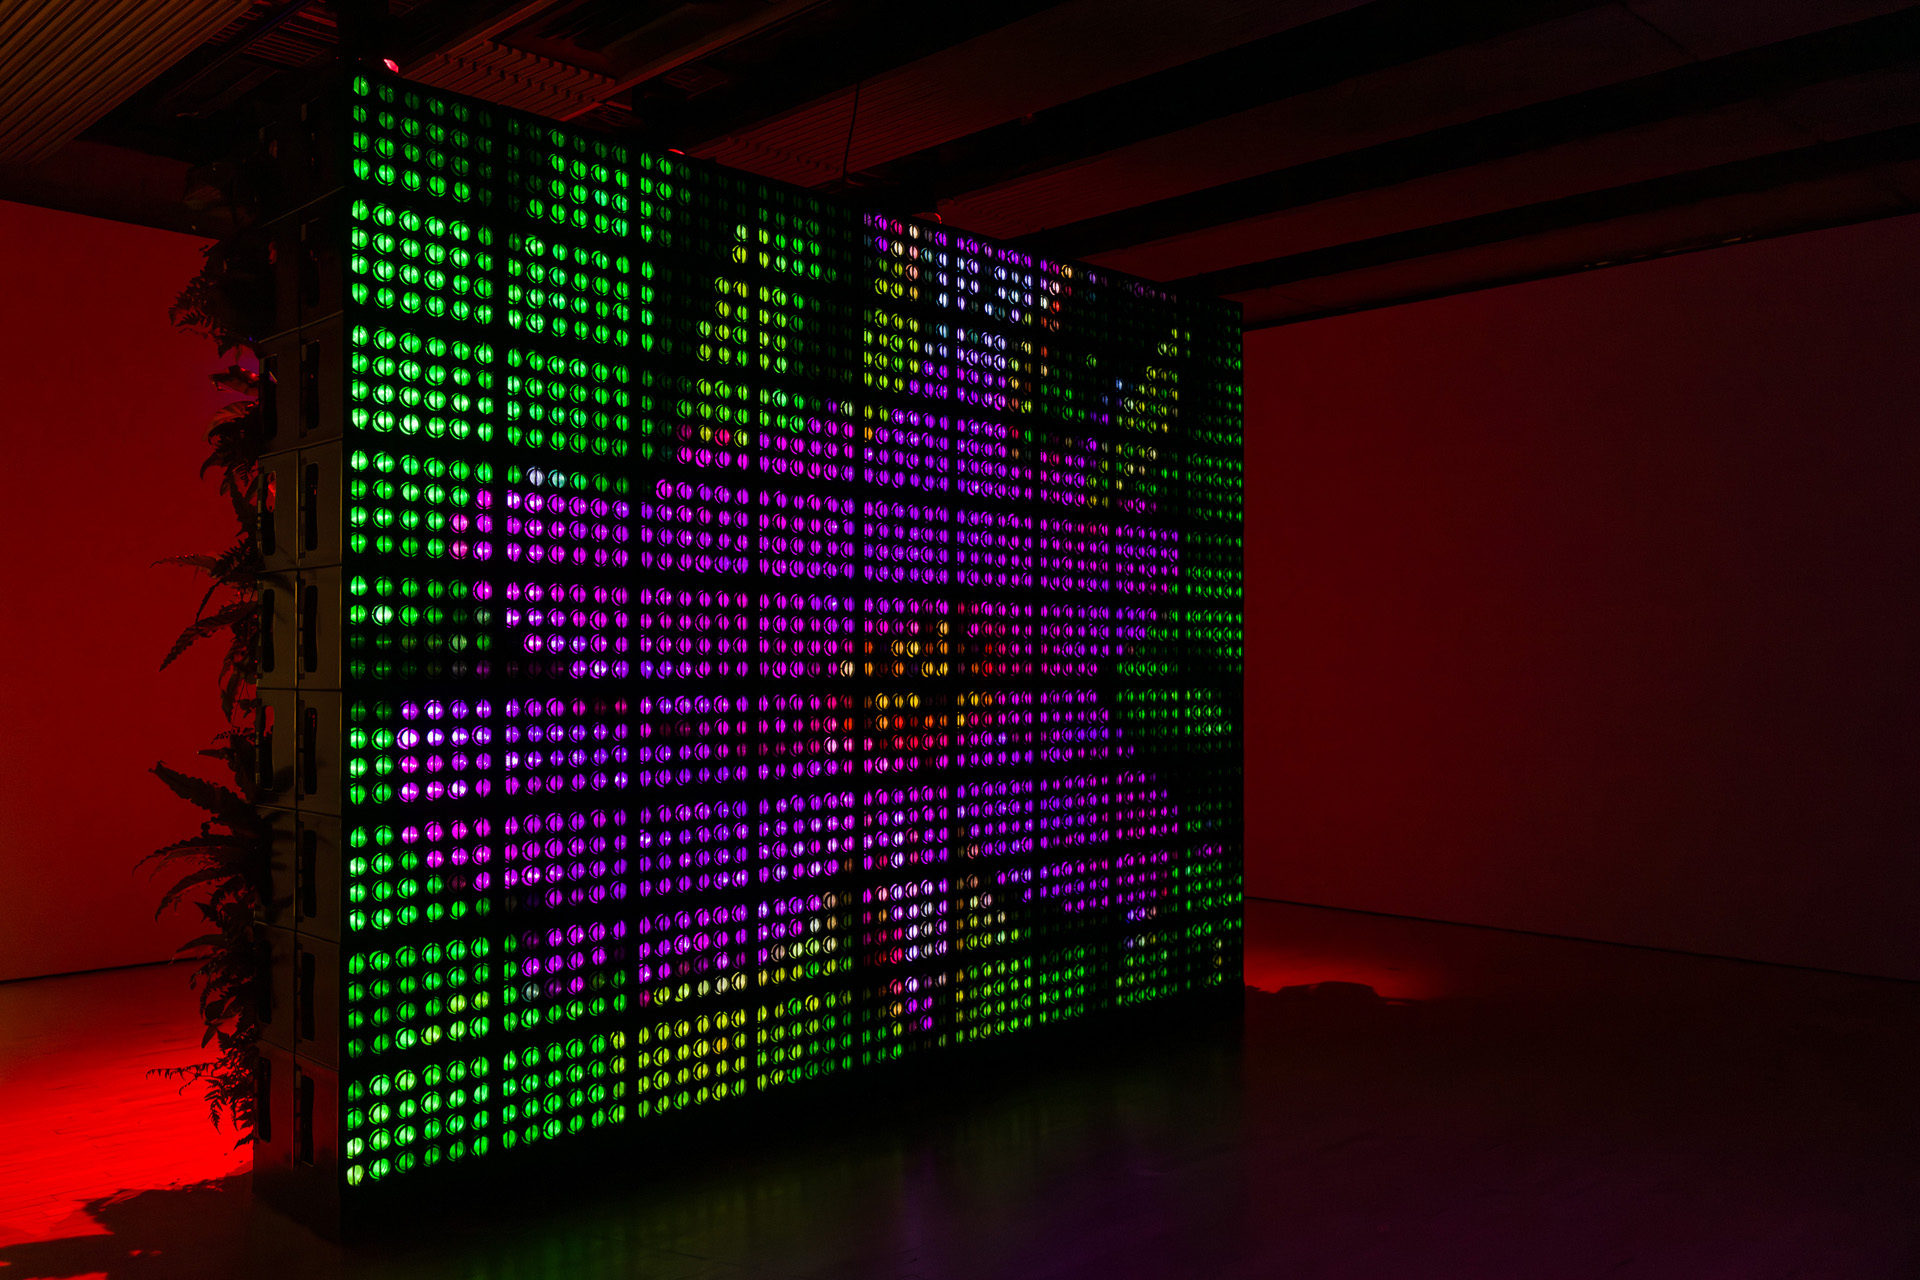 Installation view of Hito Steyerl's LED installation